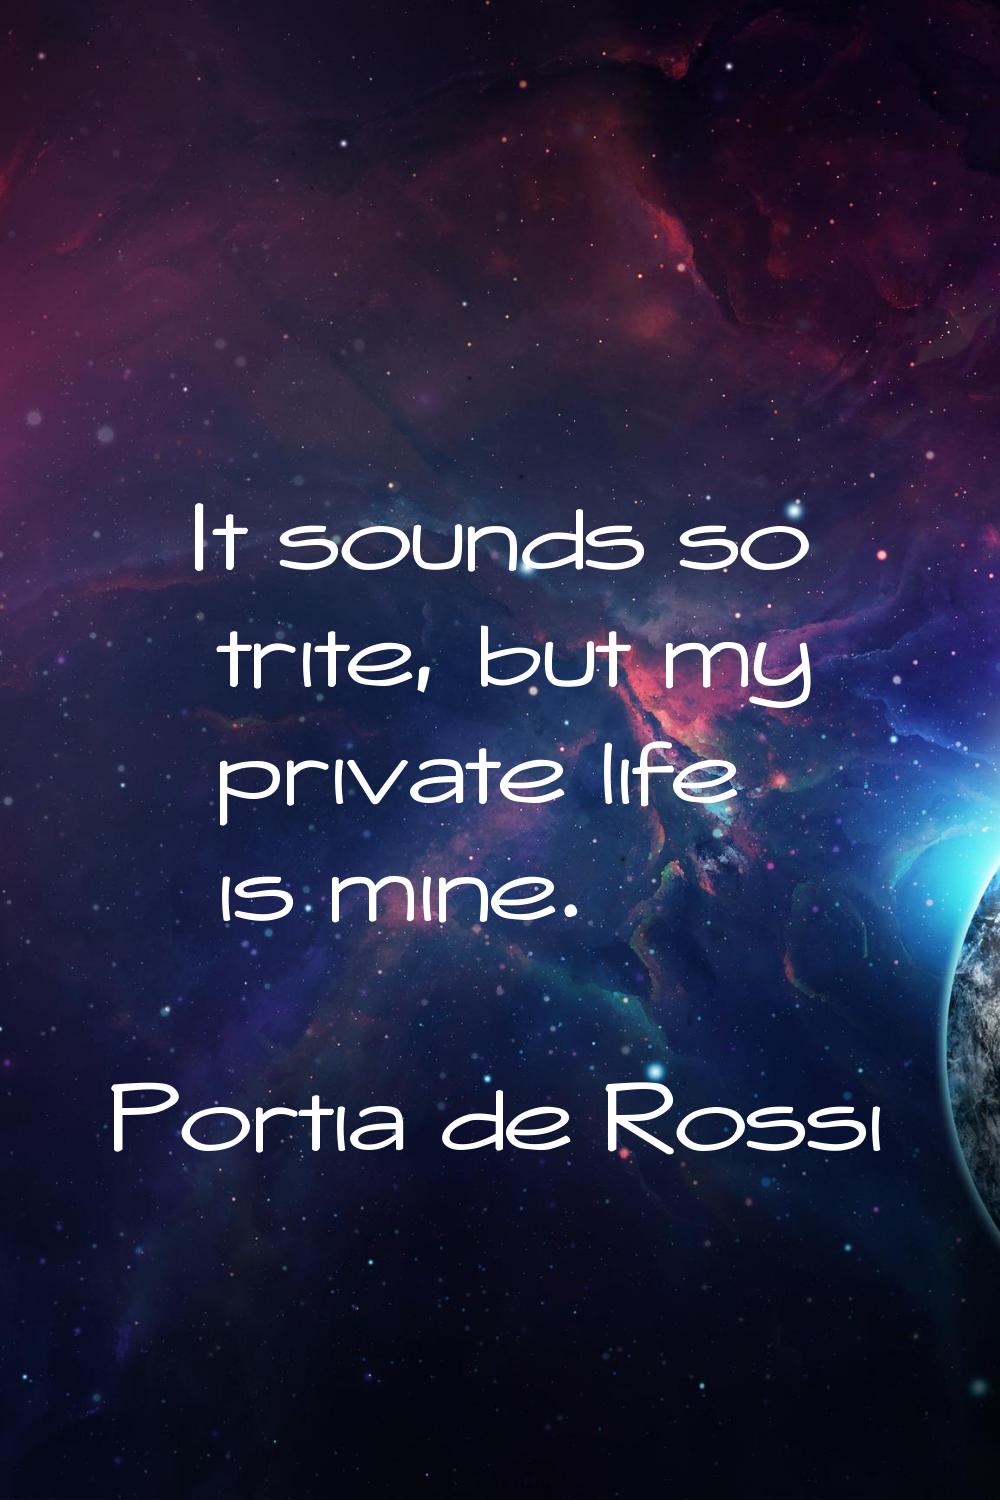 It sounds so trite, but my private life is mine.